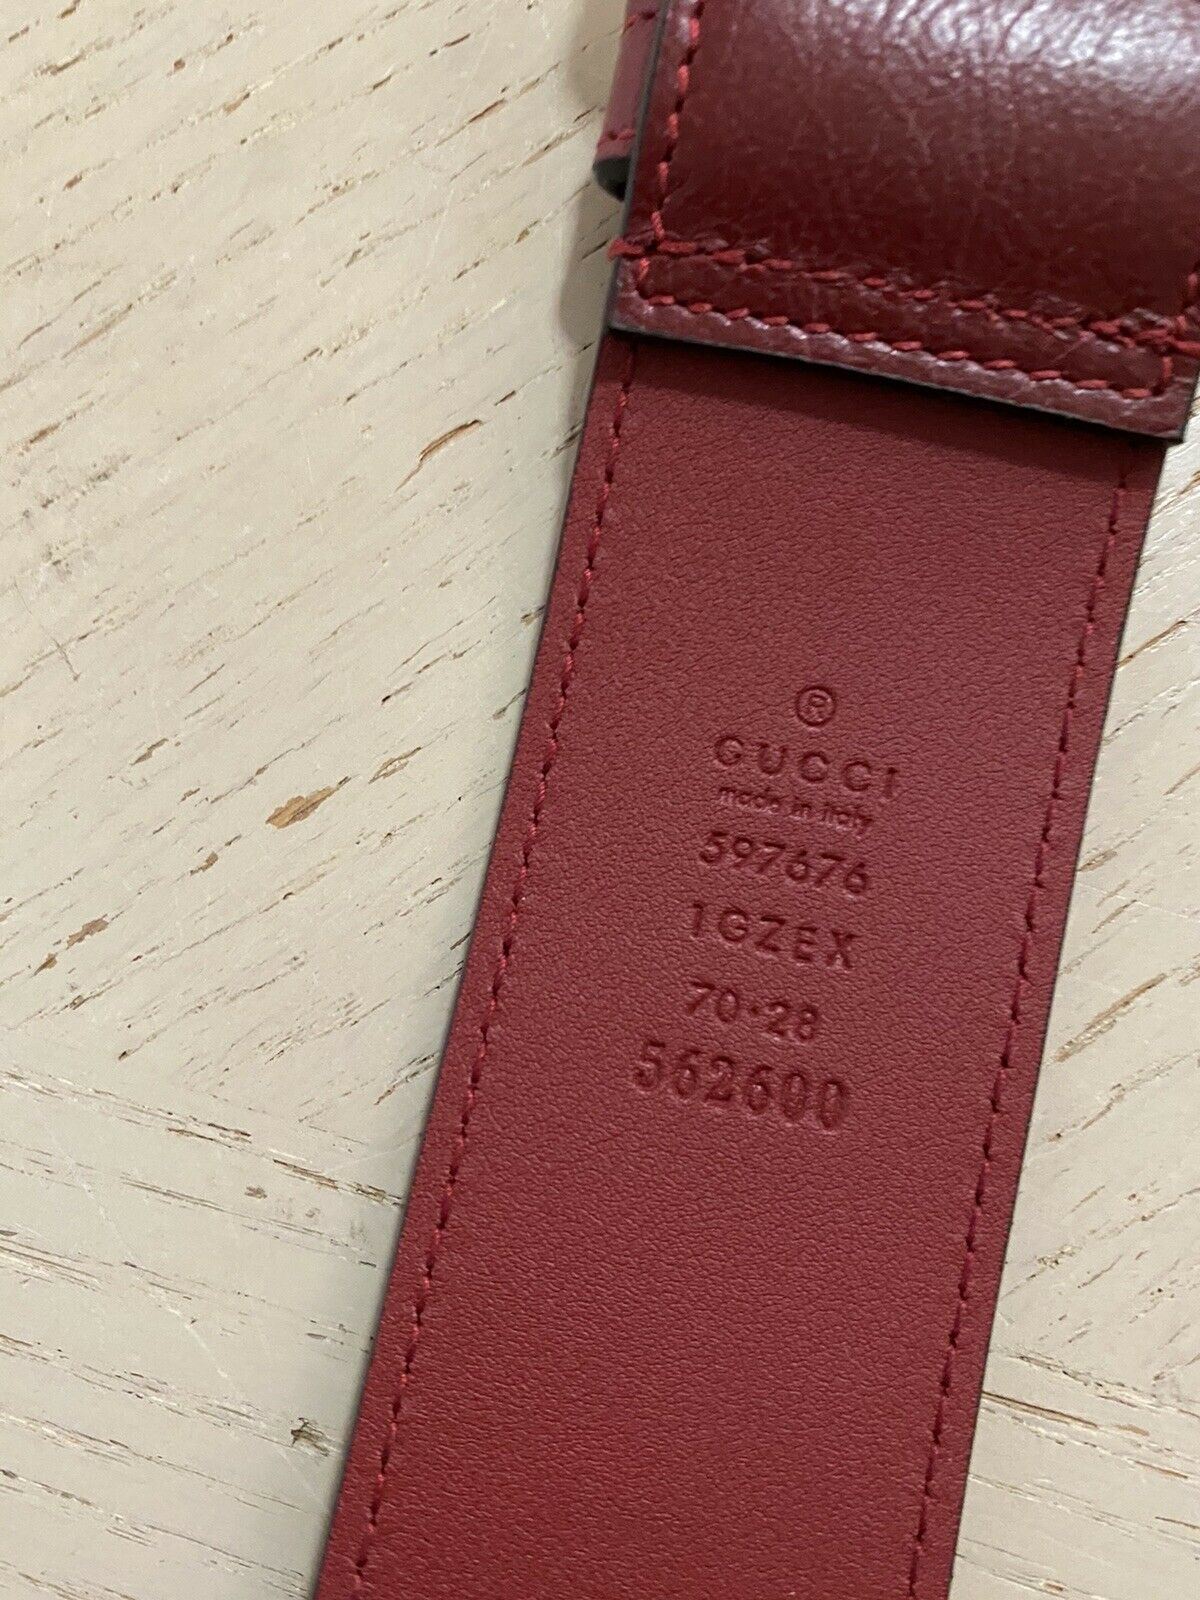 New Gucci GG Marmont Matelasse Leather Belt Bag Red 597676 Size 70/28 Italy